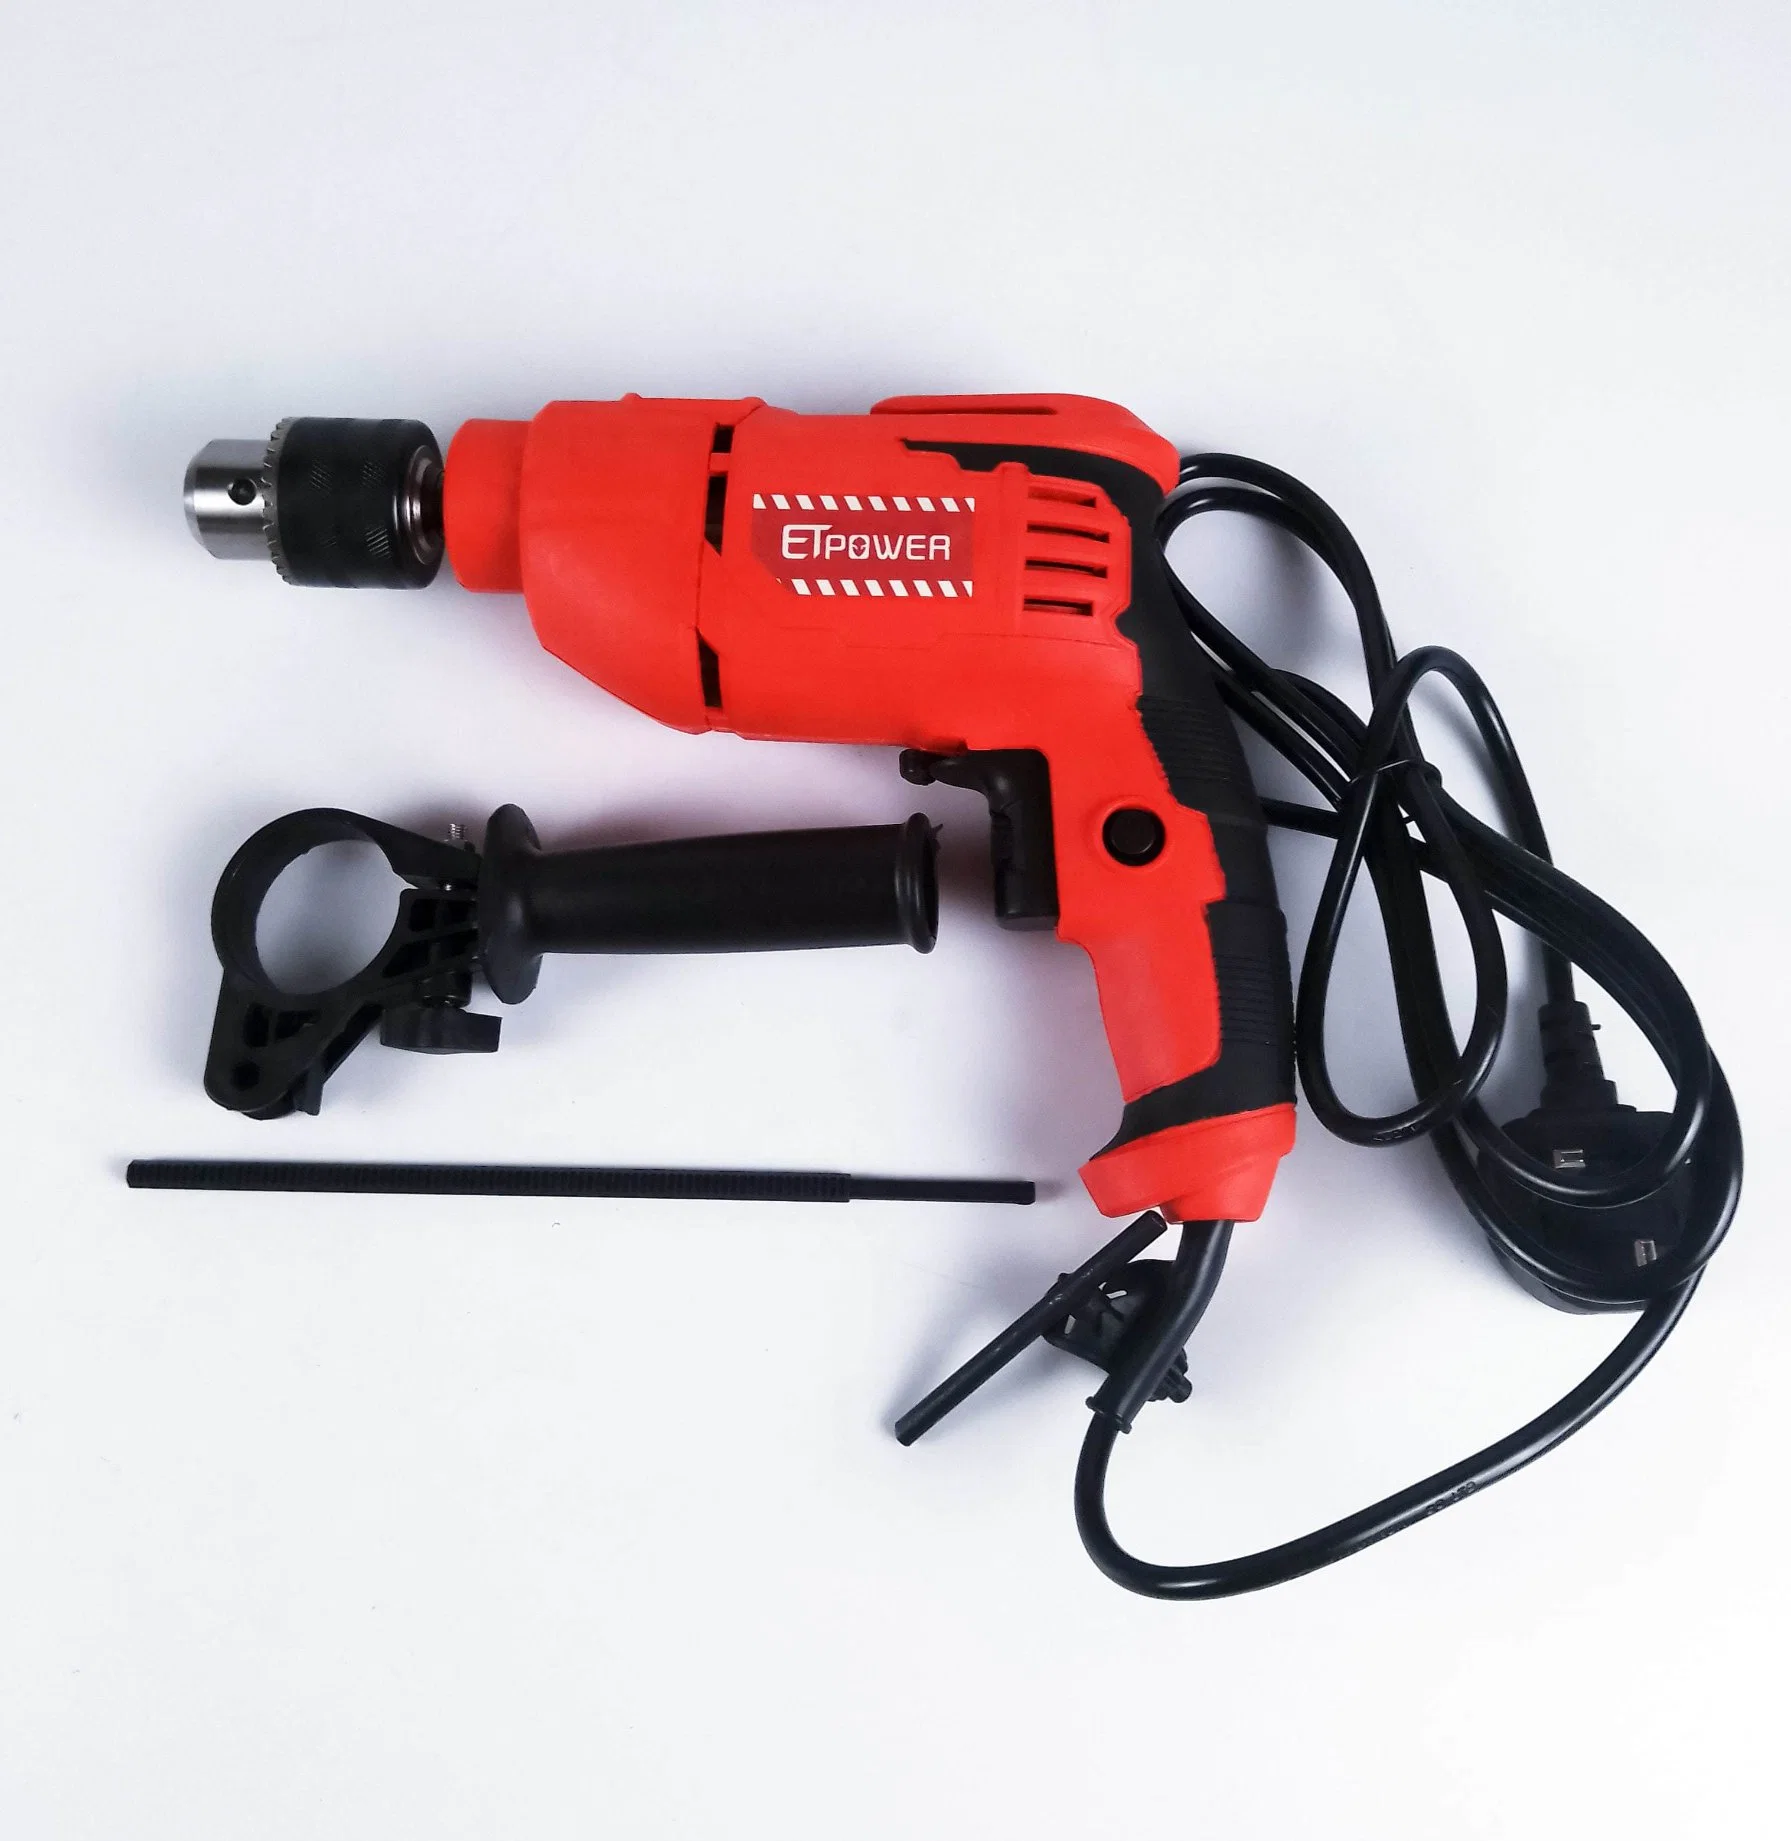 13mm 550W Reversible Electric Impact Drill Driver